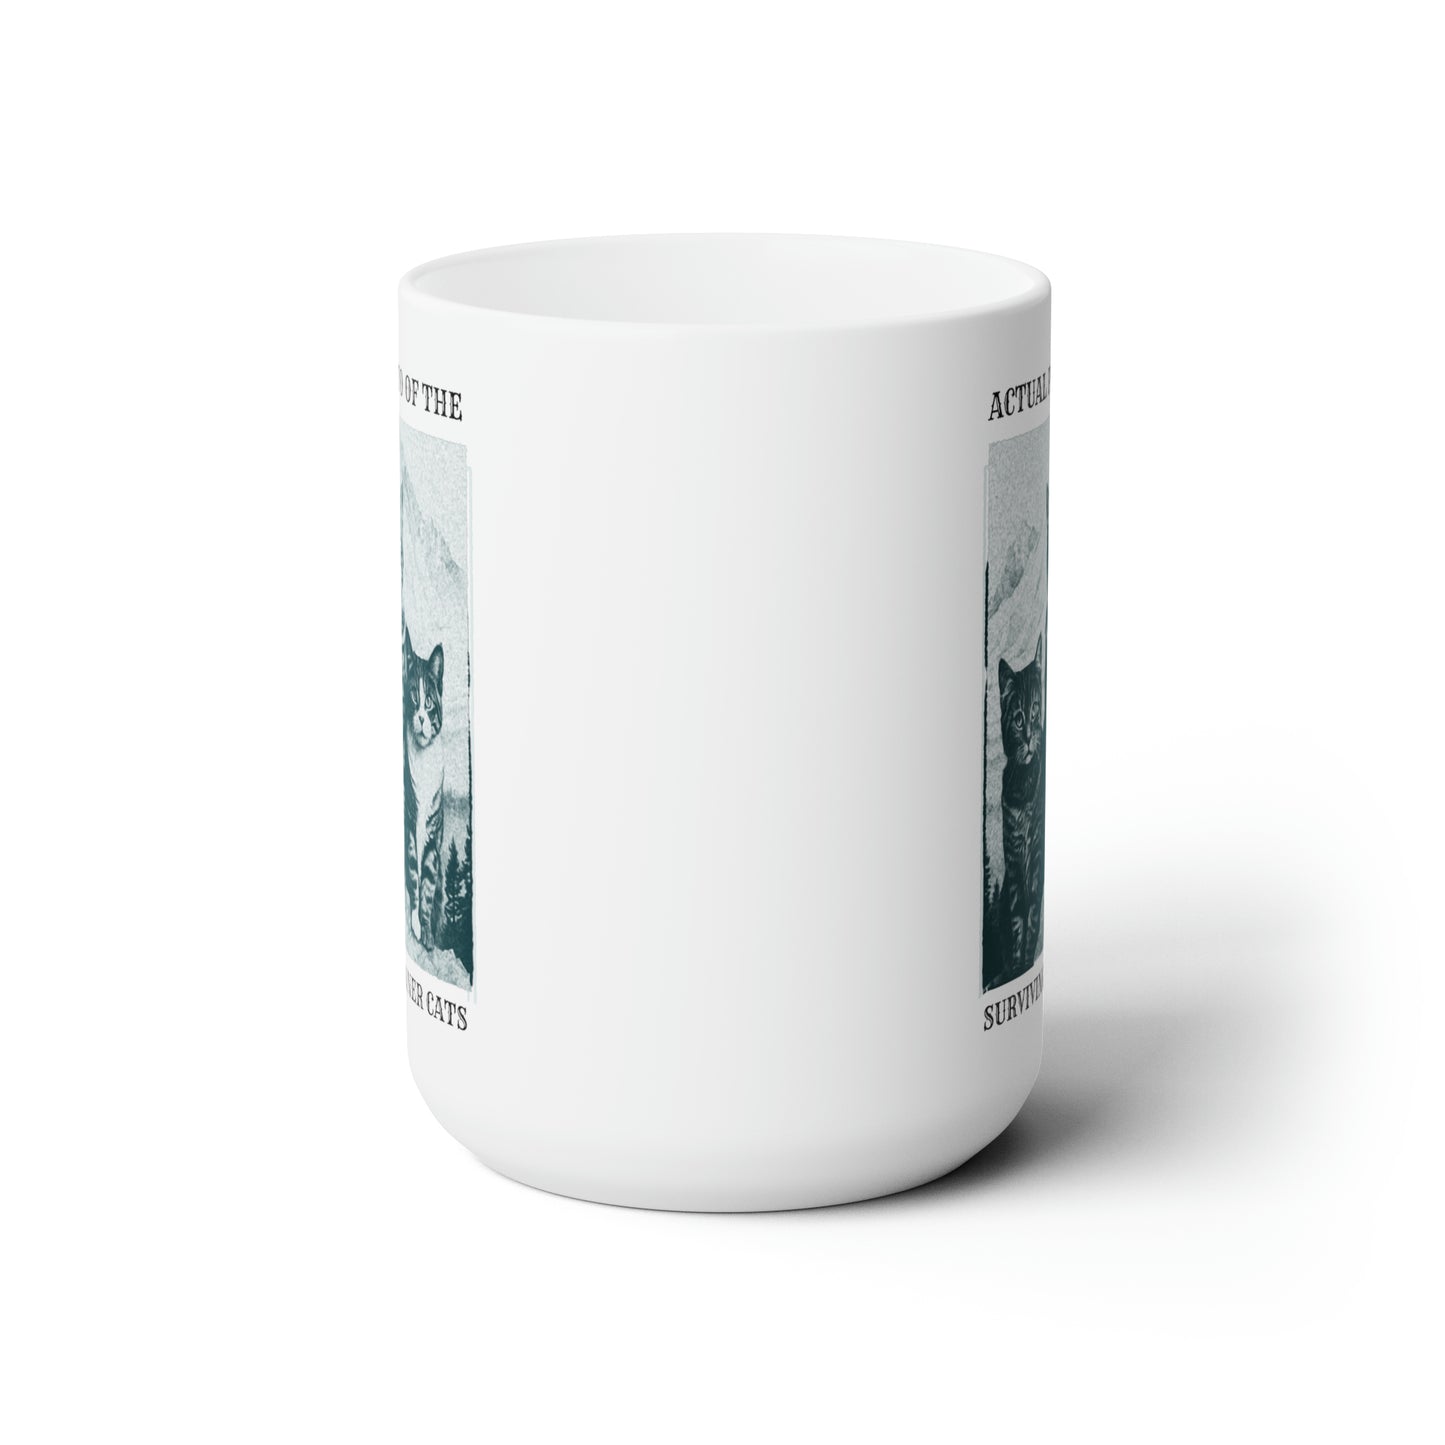 Donner Party Cat Coffee Mug